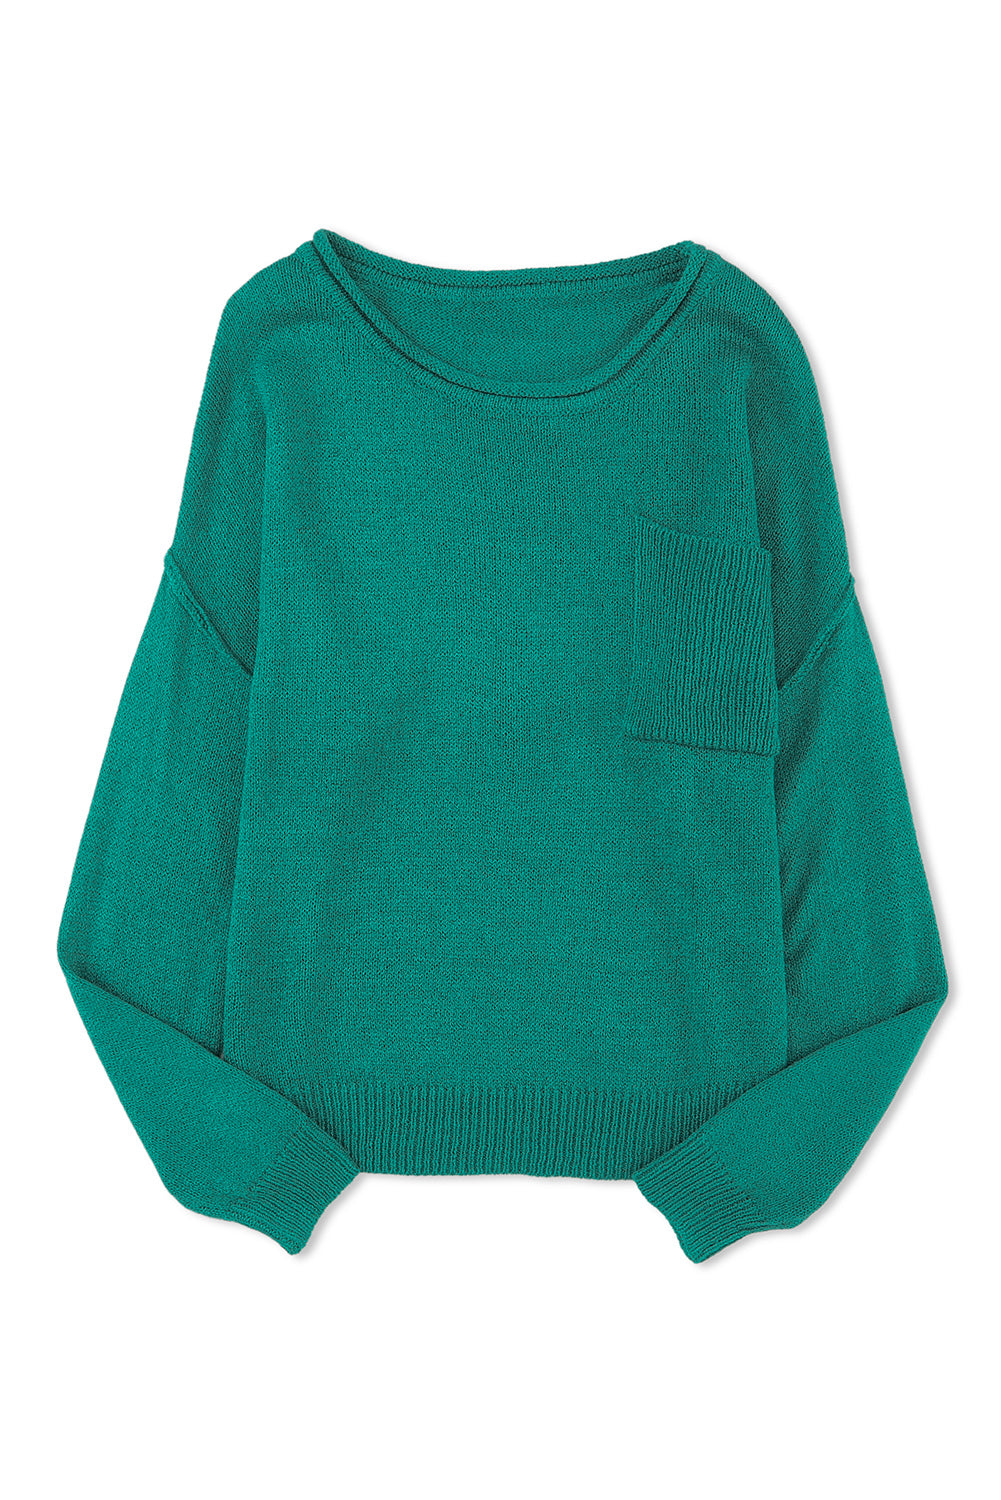 Green Solid Color Off Shoulder Rib Knit Sweater with Pocket